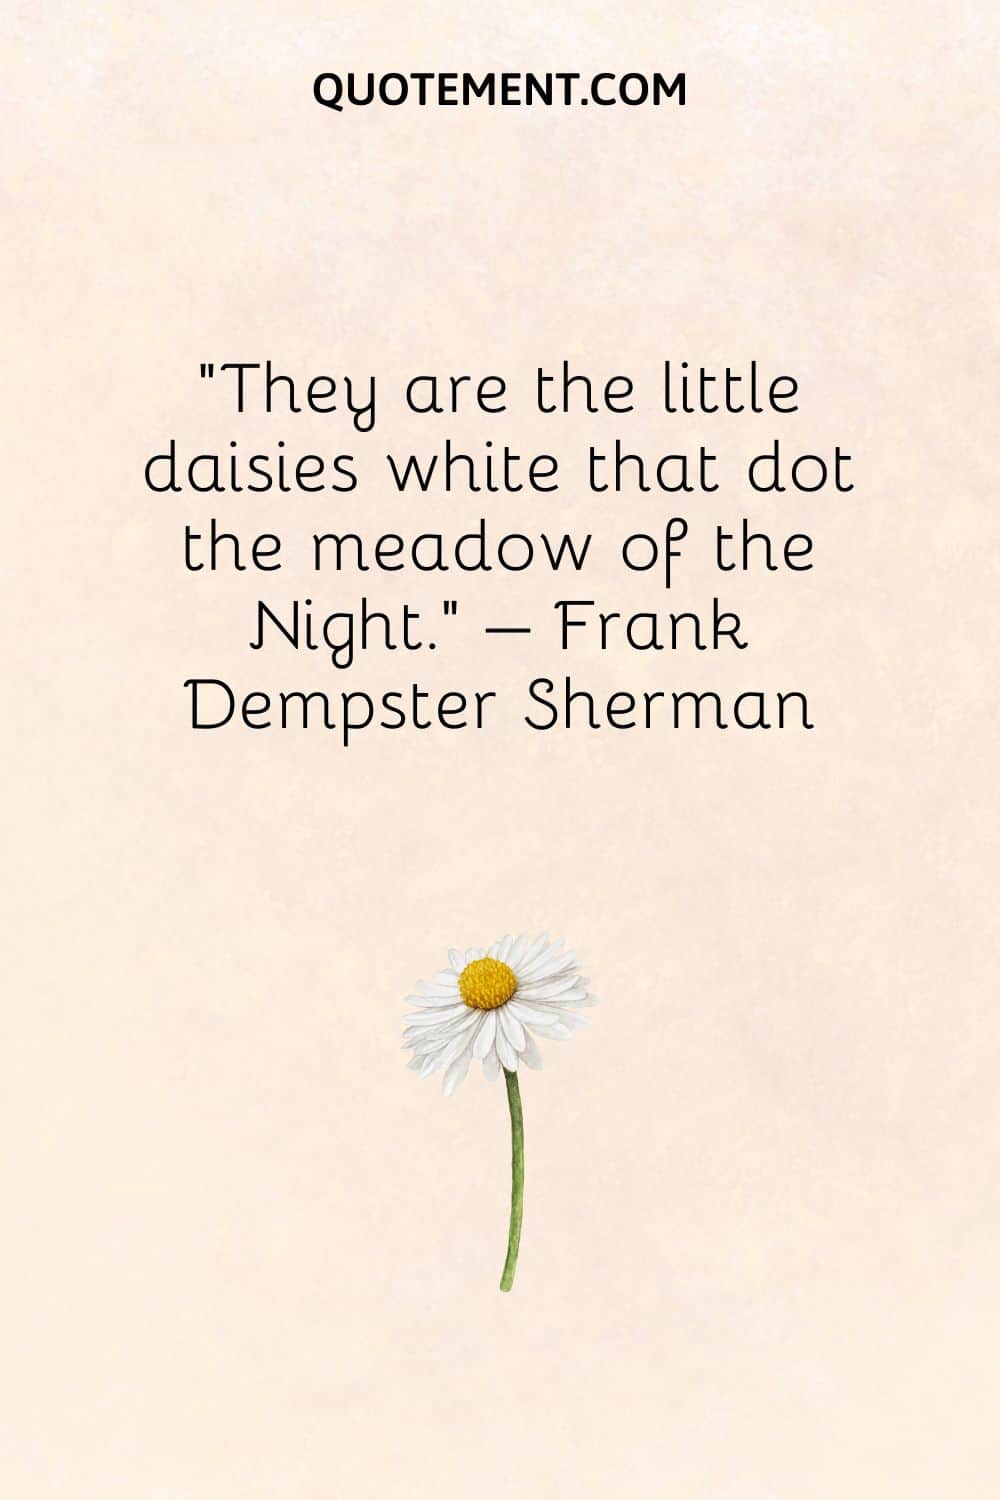 They are the little daisies white that dot the meadow of the Night.